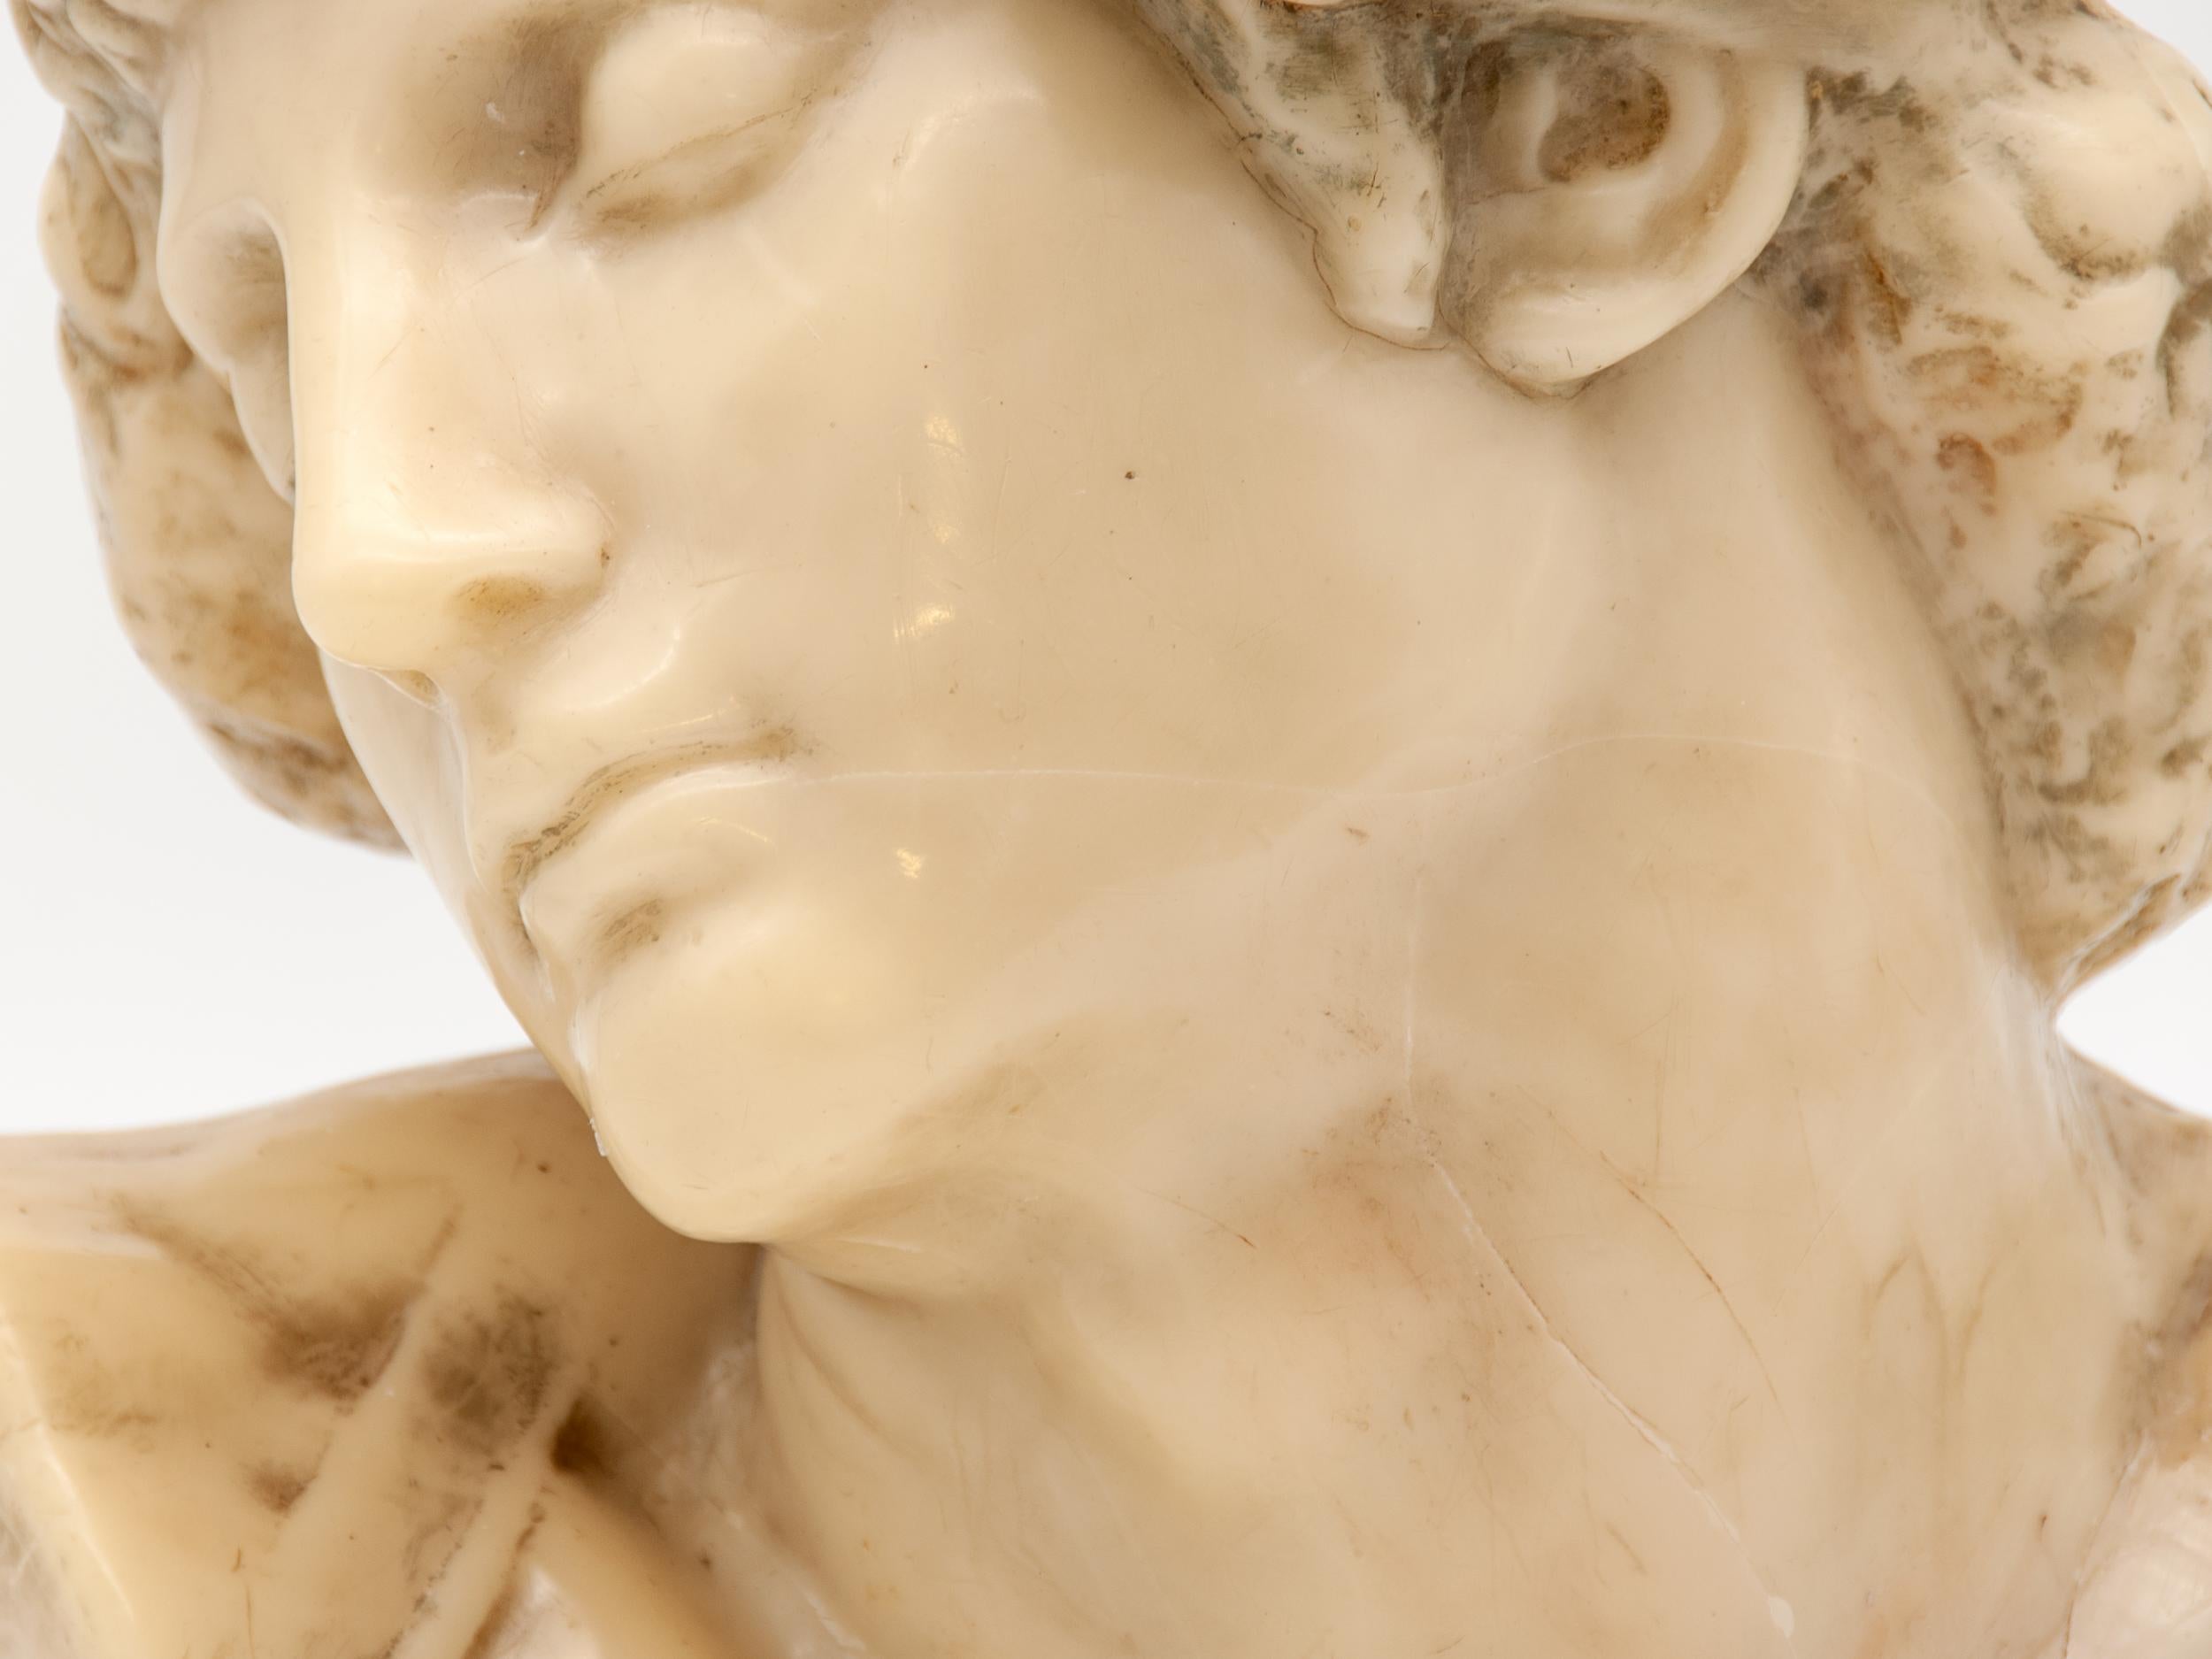 An early 20th century fine wax bust in a classical Roman style. This classical sculpture wax bust features a beautiful statuesque face with fine detail around the hair and ear. Wax busts are increasingly rare, particularly in this style and